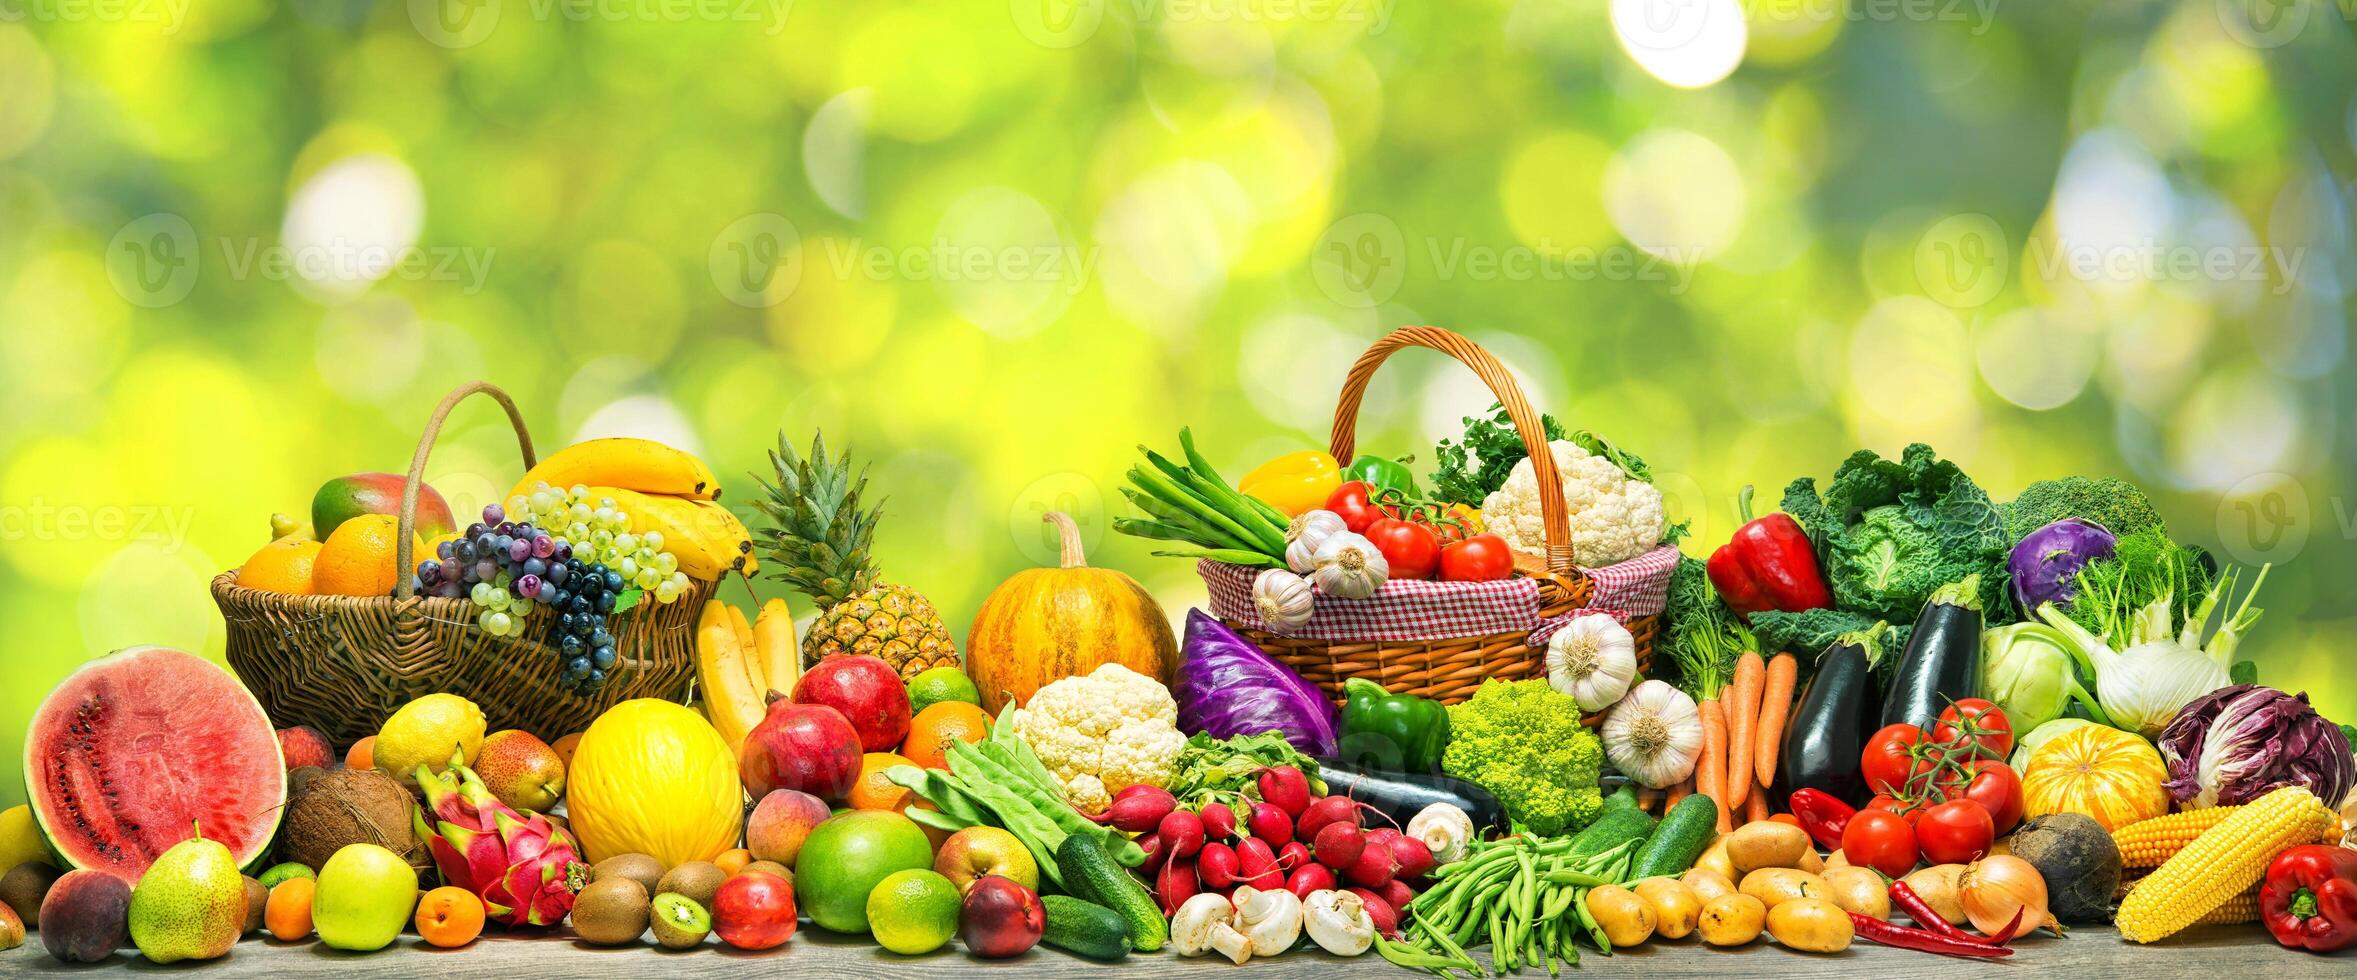 Fresh vegetables and fruits background photo